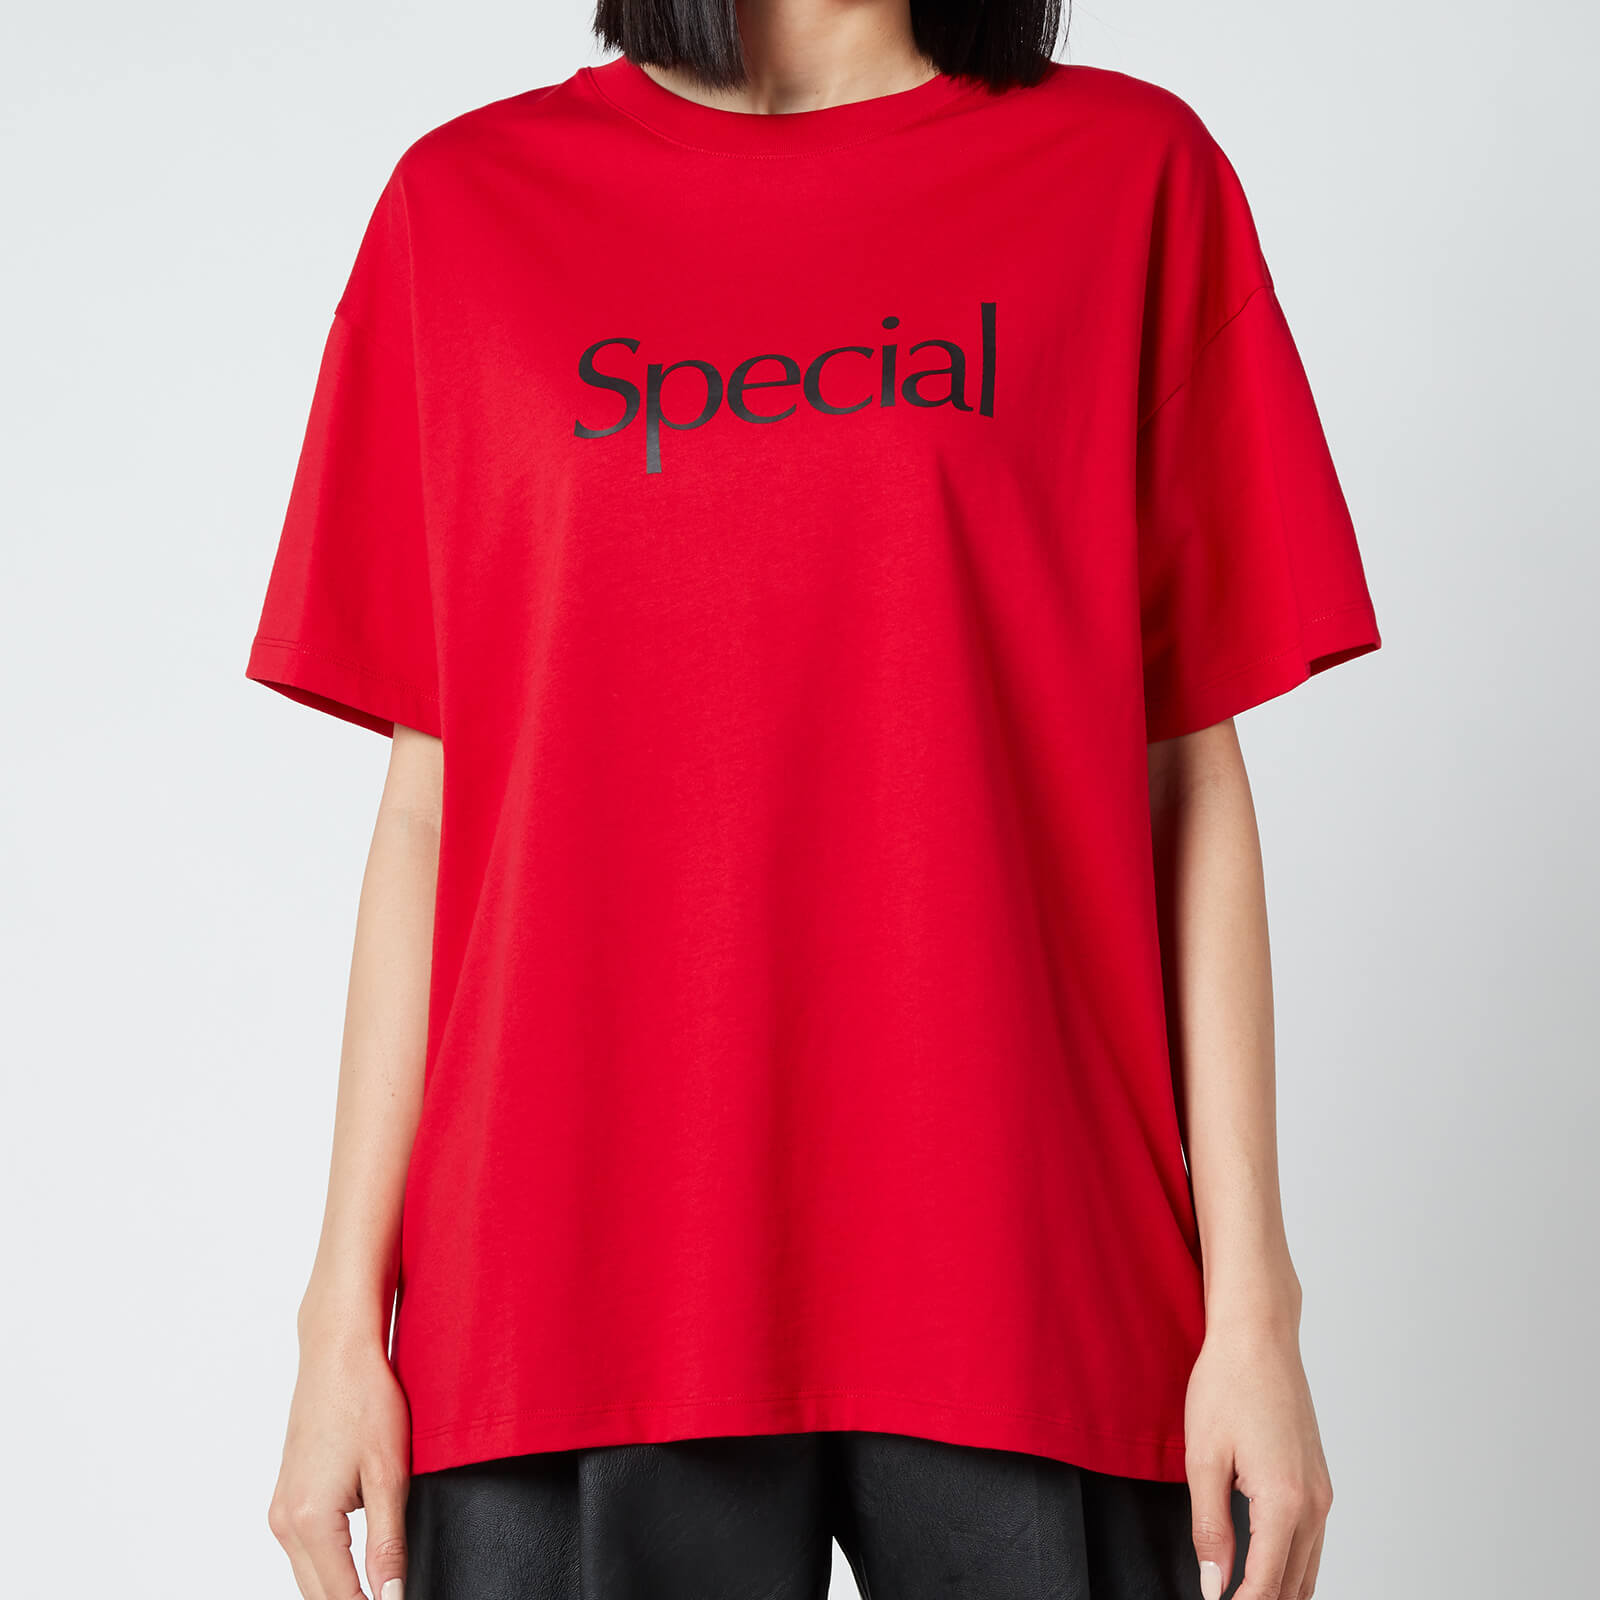 More Joy Women's Special T-Shirt - Red - S